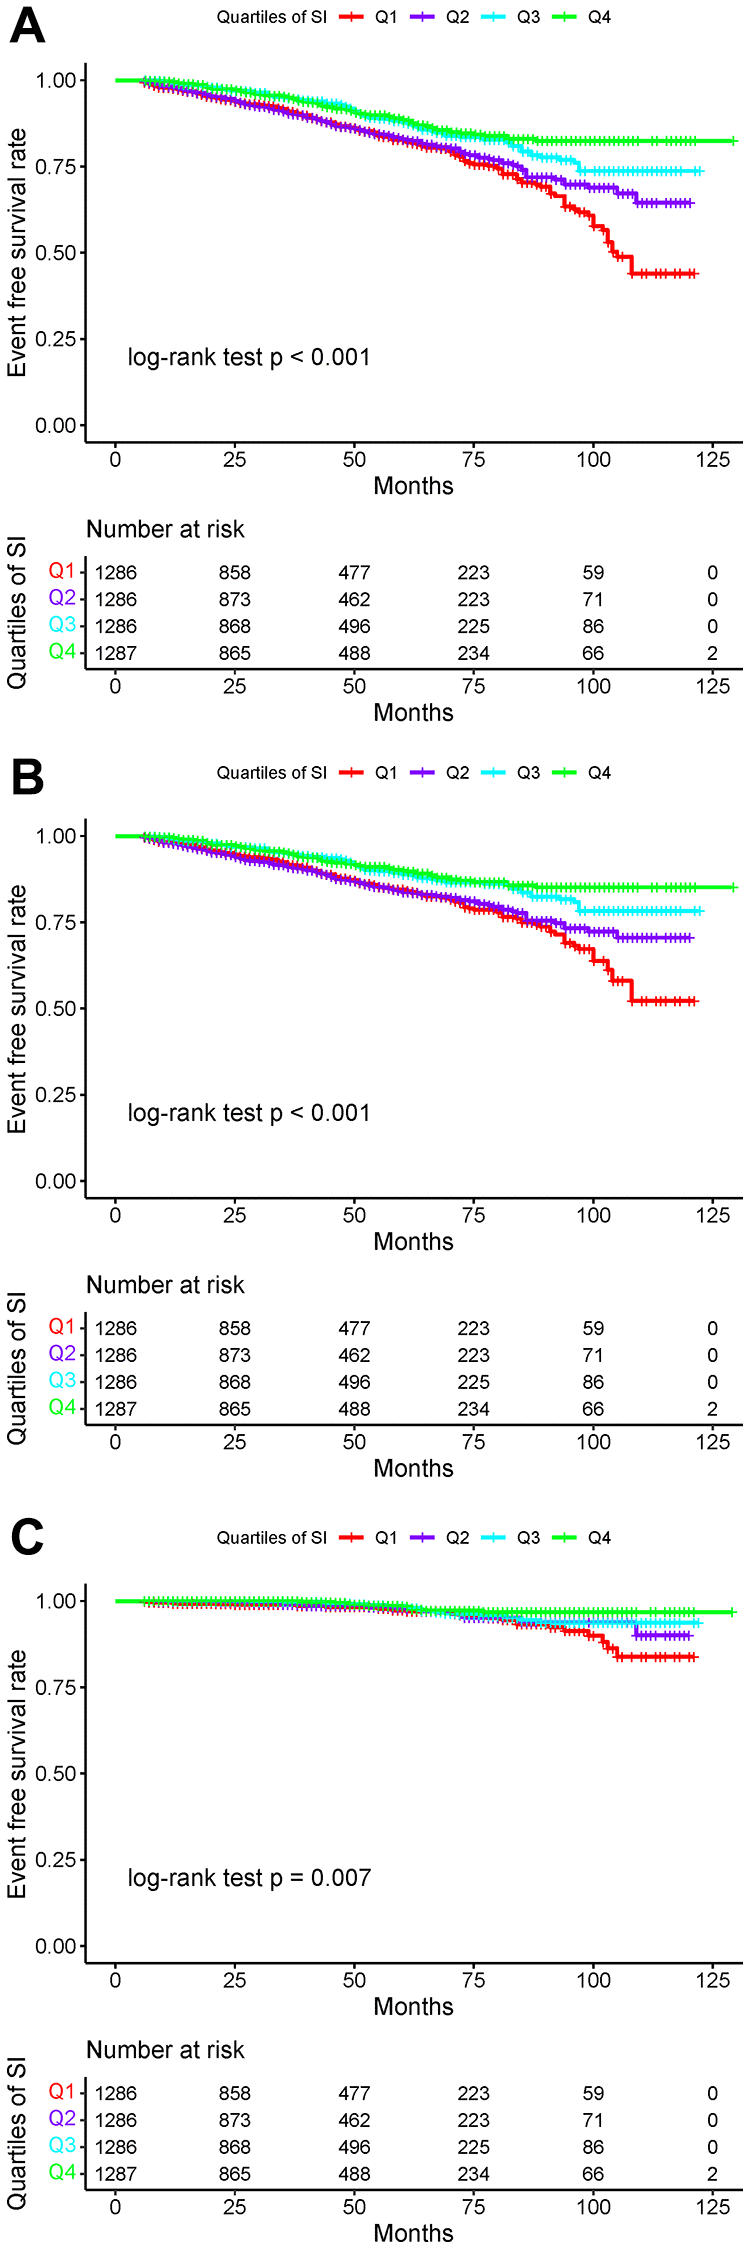 Kaplan-Meier survival curves for total strokes and individual outcomes based on SI quartiles. (A) Total stroke; (B) Ischemic stroke; (C) Hemorrhagic stroke.